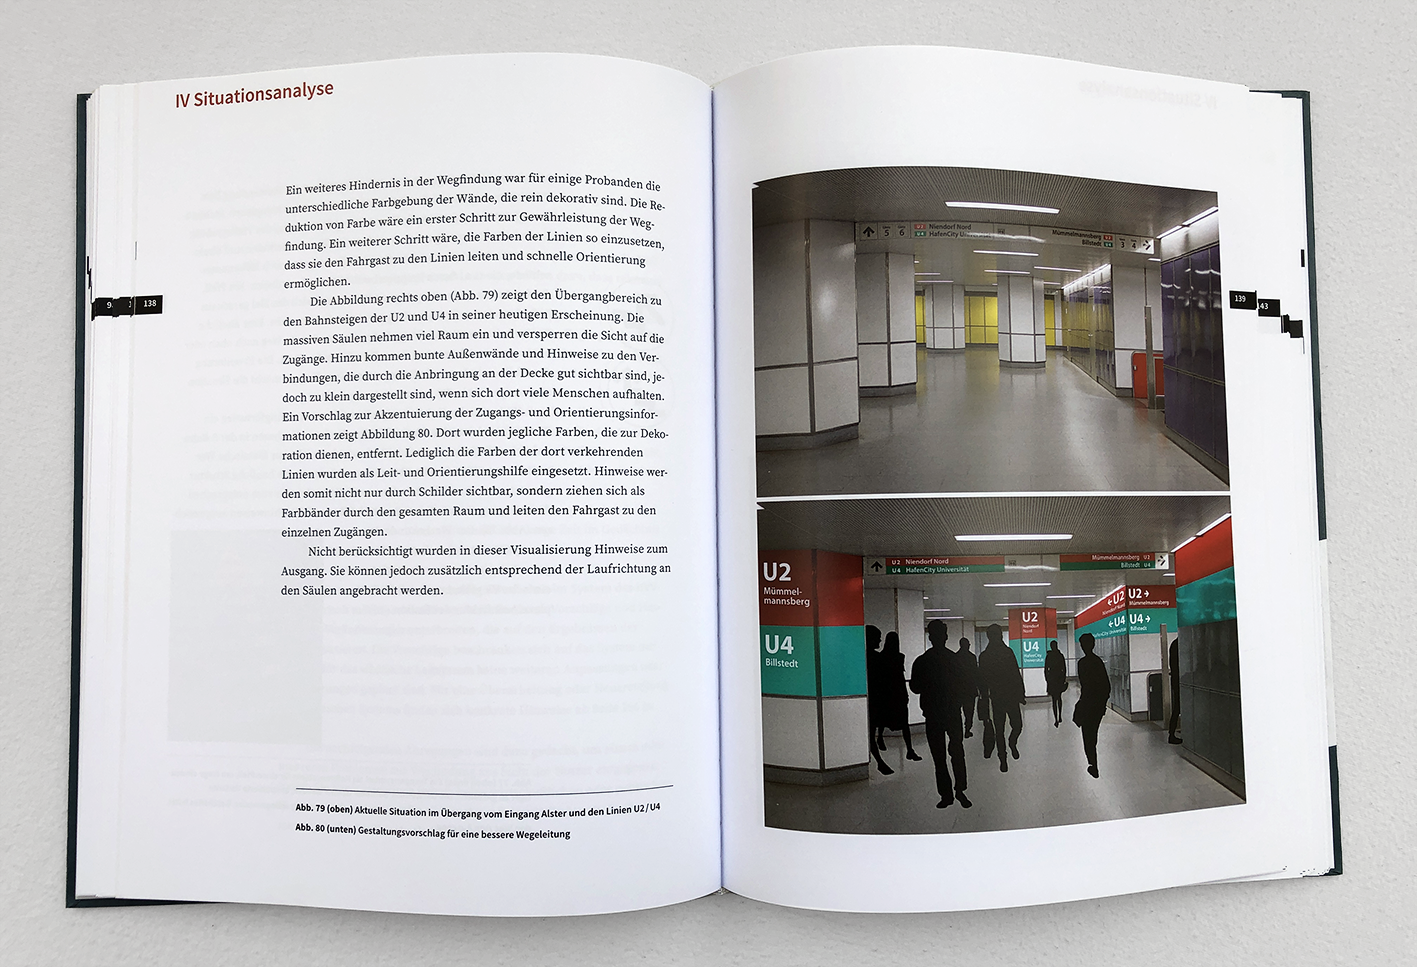 Extract from my Master thesis on different wayfinding systems within Hamburg.